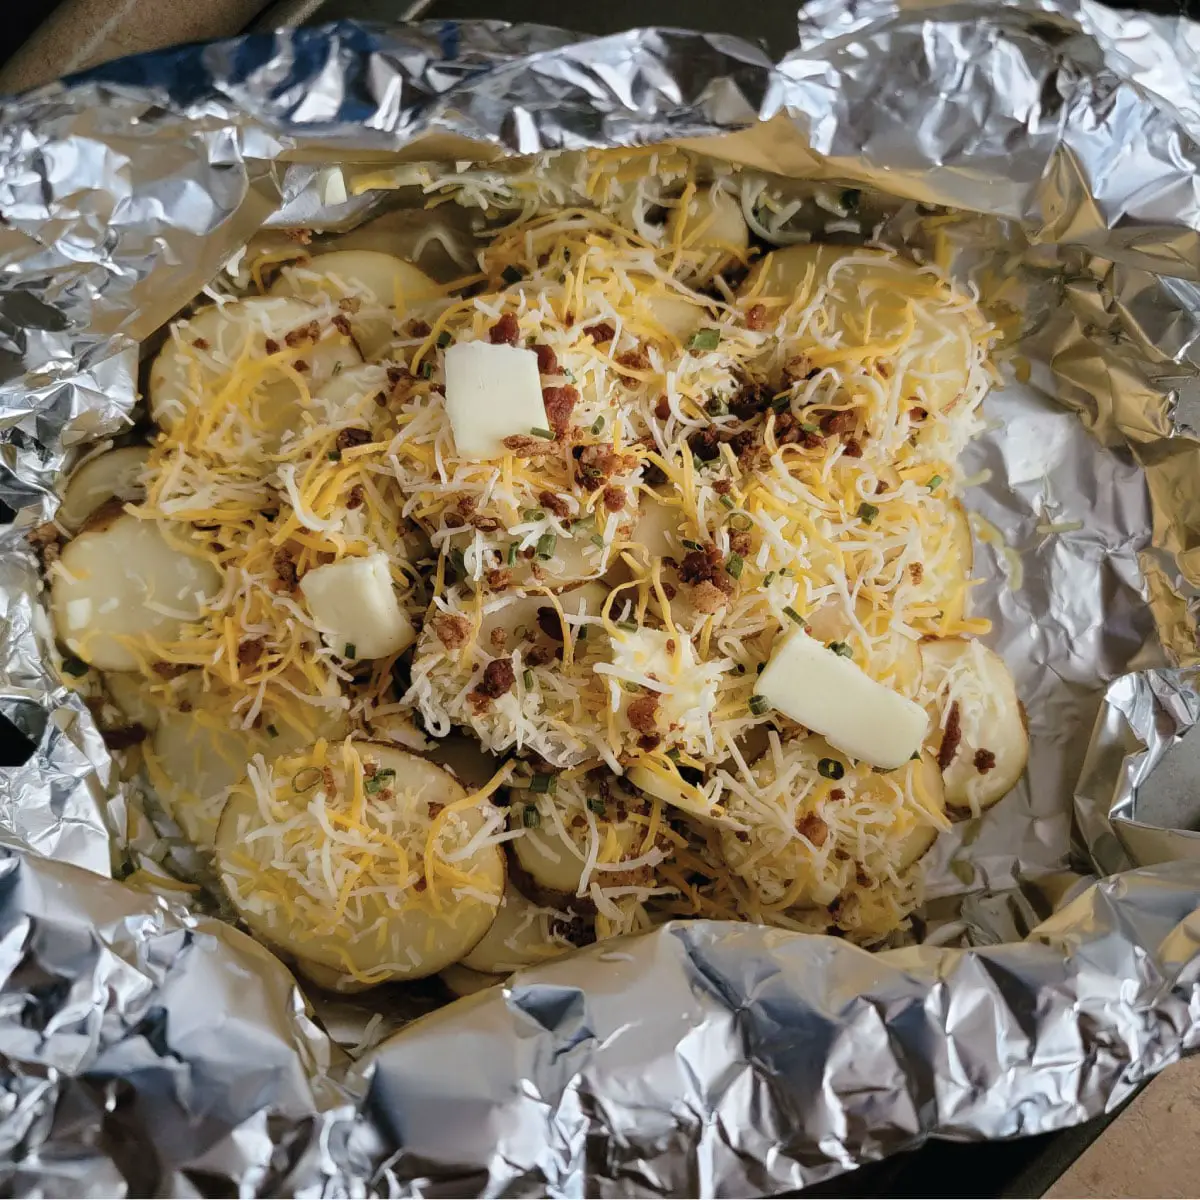 Two layers of potato slices with cheese, bacon, butter and chives on each layer ready to be closed up and put on grill.